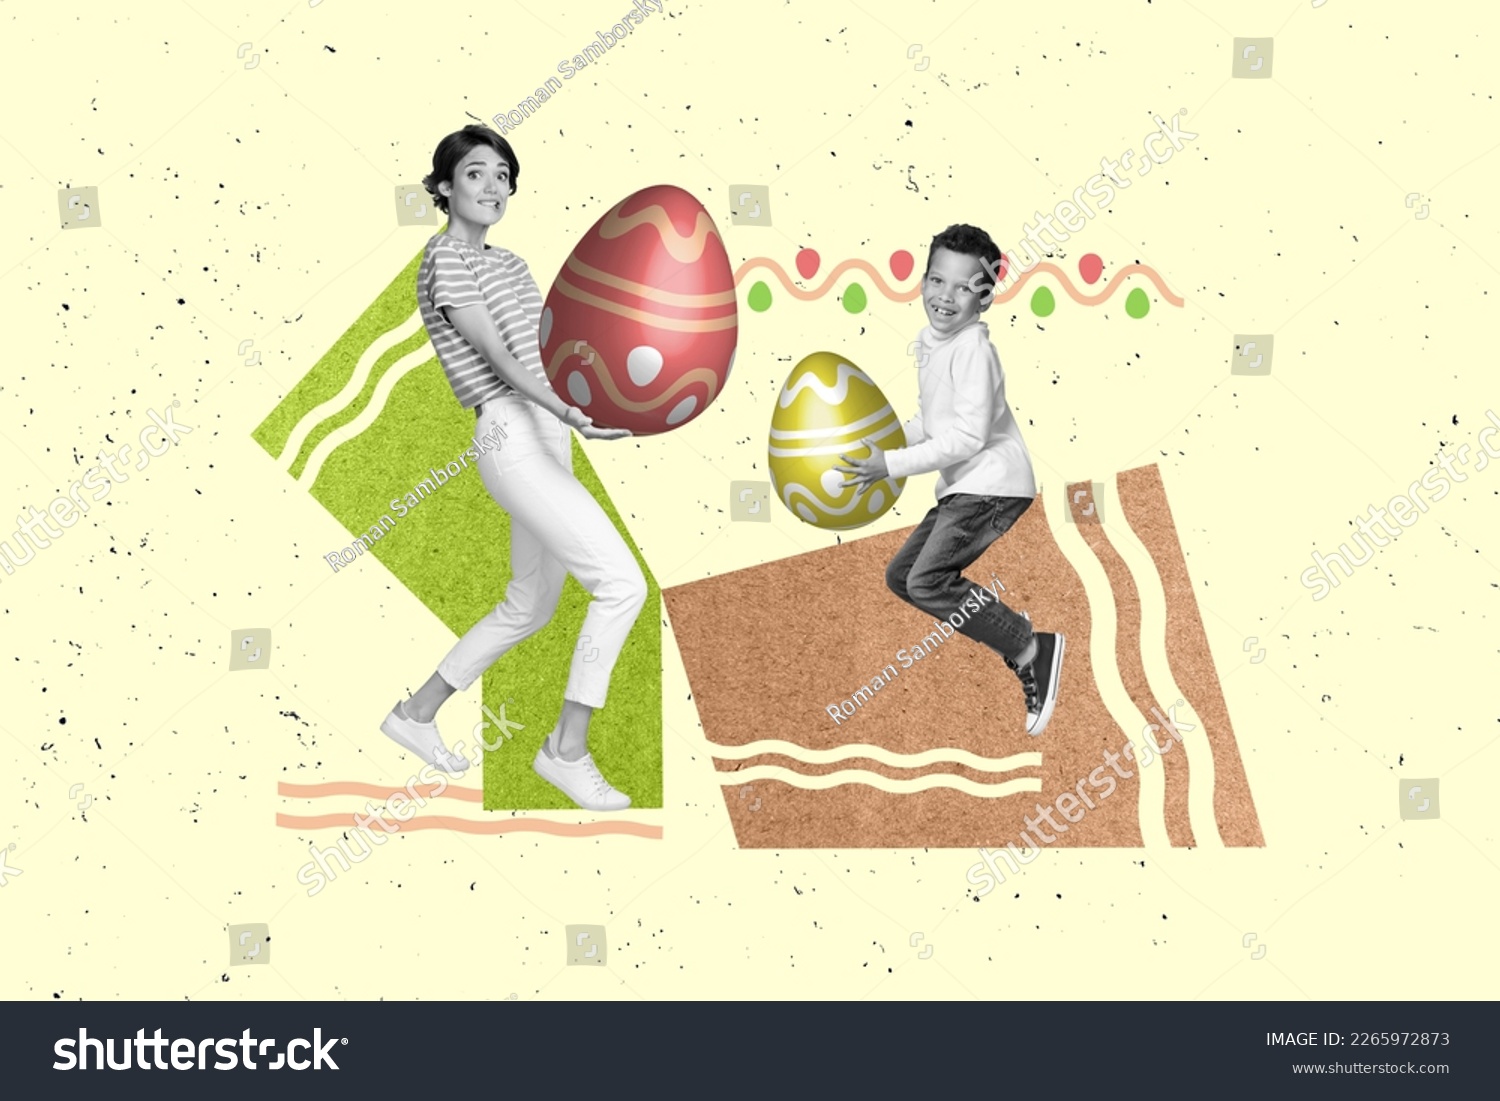 Invitation poster collage of two people mommy kid celebrate together easter occasion collect chocolate eggs hide by bunny #2265972873